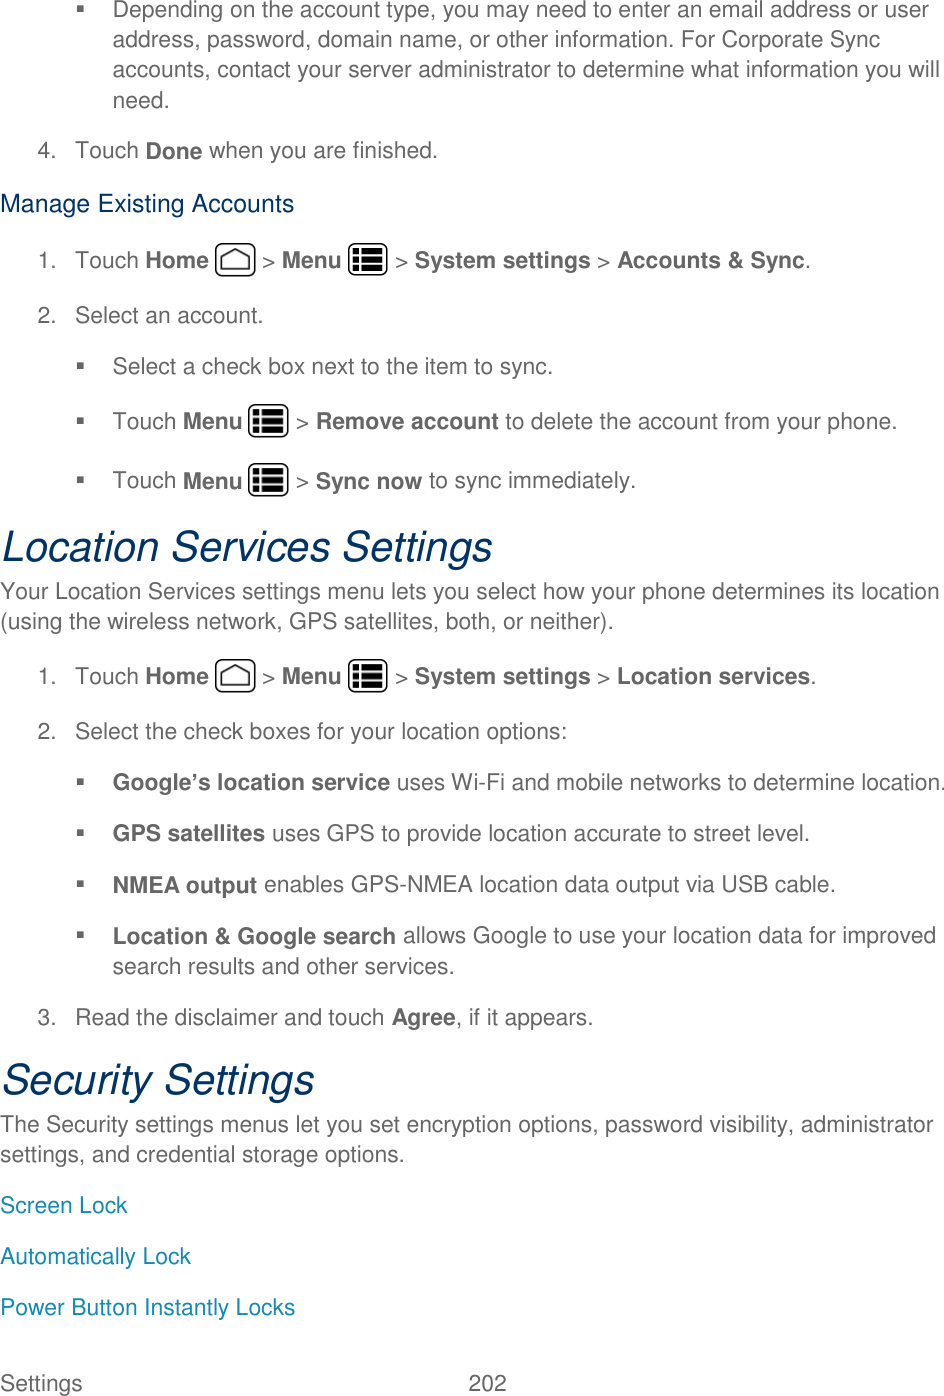 Settings    202   Depending on the account type, you may need to enter an email address or user address, password, domain name, or other information. For Corporate Sync accounts, contact your server administrator to determine what information you will need. 4.  Touch Done when you are finished. Manage Existing Accounts 1.  Touch Home   &gt; Menu   &gt; System settings &gt; Accounts &amp; Sync. 2.  Select an account.   Select a check box next to the item to sync.   Touch Menu   &gt; Remove account to delete the account from your phone.   Touch Menu   &gt; Sync now to sync immediately. Location Services Settings Your Location Services settings menu lets you select how your phone determines its location (using the wireless network, GPS satellites, both, or neither).  1.  Touch Home   &gt; Menu   &gt; System settings &gt; Location services. 2.  Select the check boxes for your location options:  Google’s location service uses Wi-Fi and mobile networks to determine location.  GPS satellites uses GPS to provide location accurate to street level.  NMEA output enables GPS-NMEA location data output via USB cable.  Location &amp; Google search allows Google to use your location data for improved search results and other services. 3.  Read the disclaimer and touch Agree, if it appears. Security Settings The Security settings menus let you set encryption options, password visibility, administrator settings, and credential storage options. Screen Lock Automatically Lock Power Button Instantly Locks 